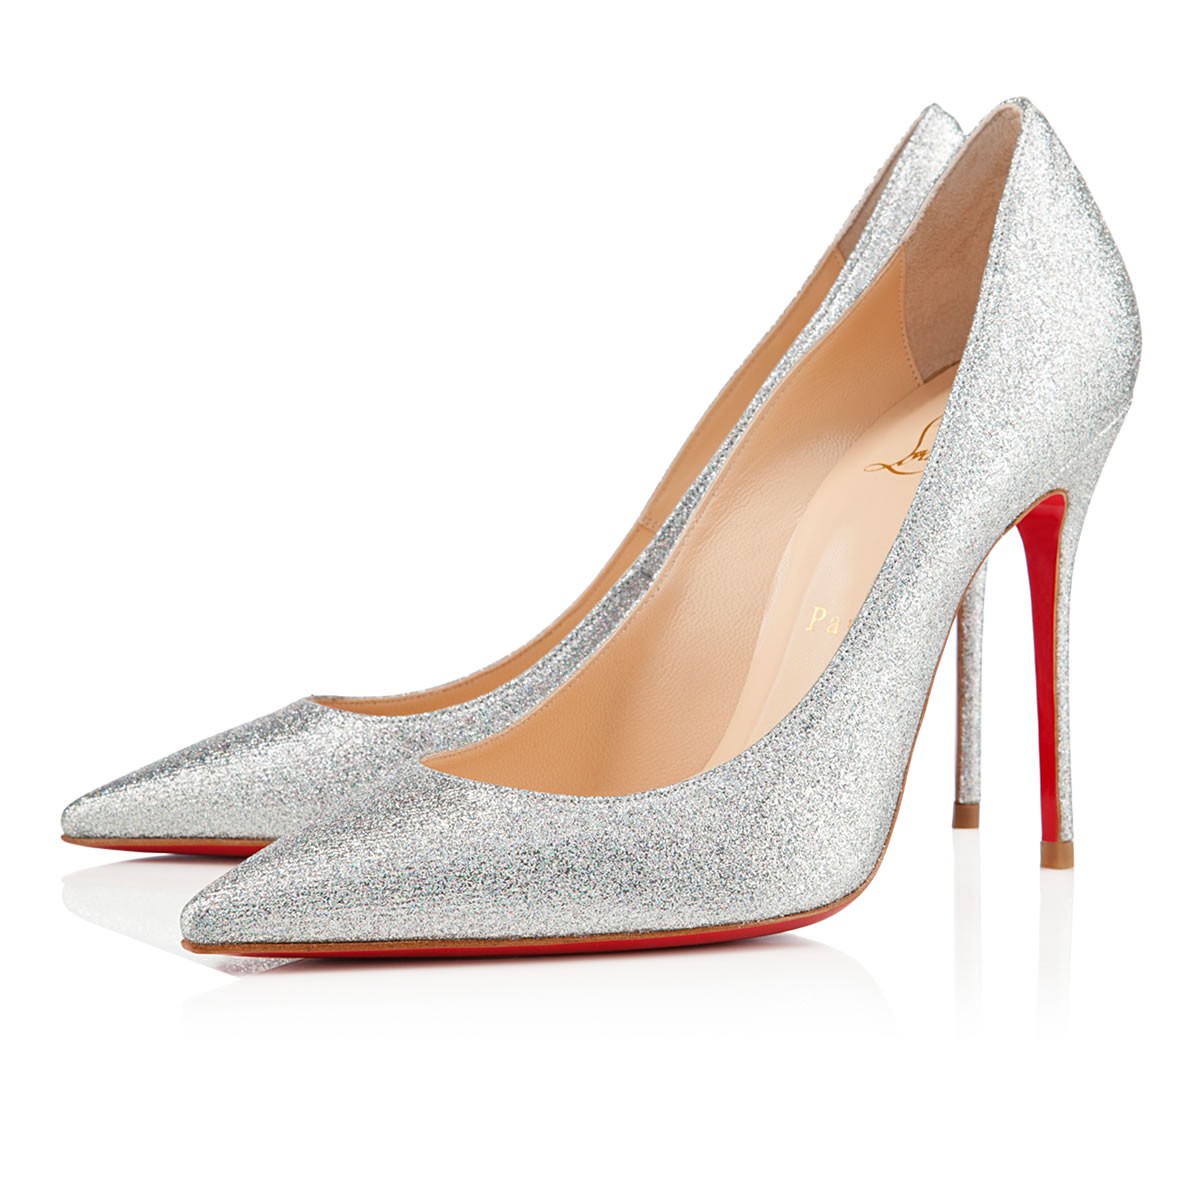 Christian Louboutin Decollete 554 100mm Special Occasion Silver